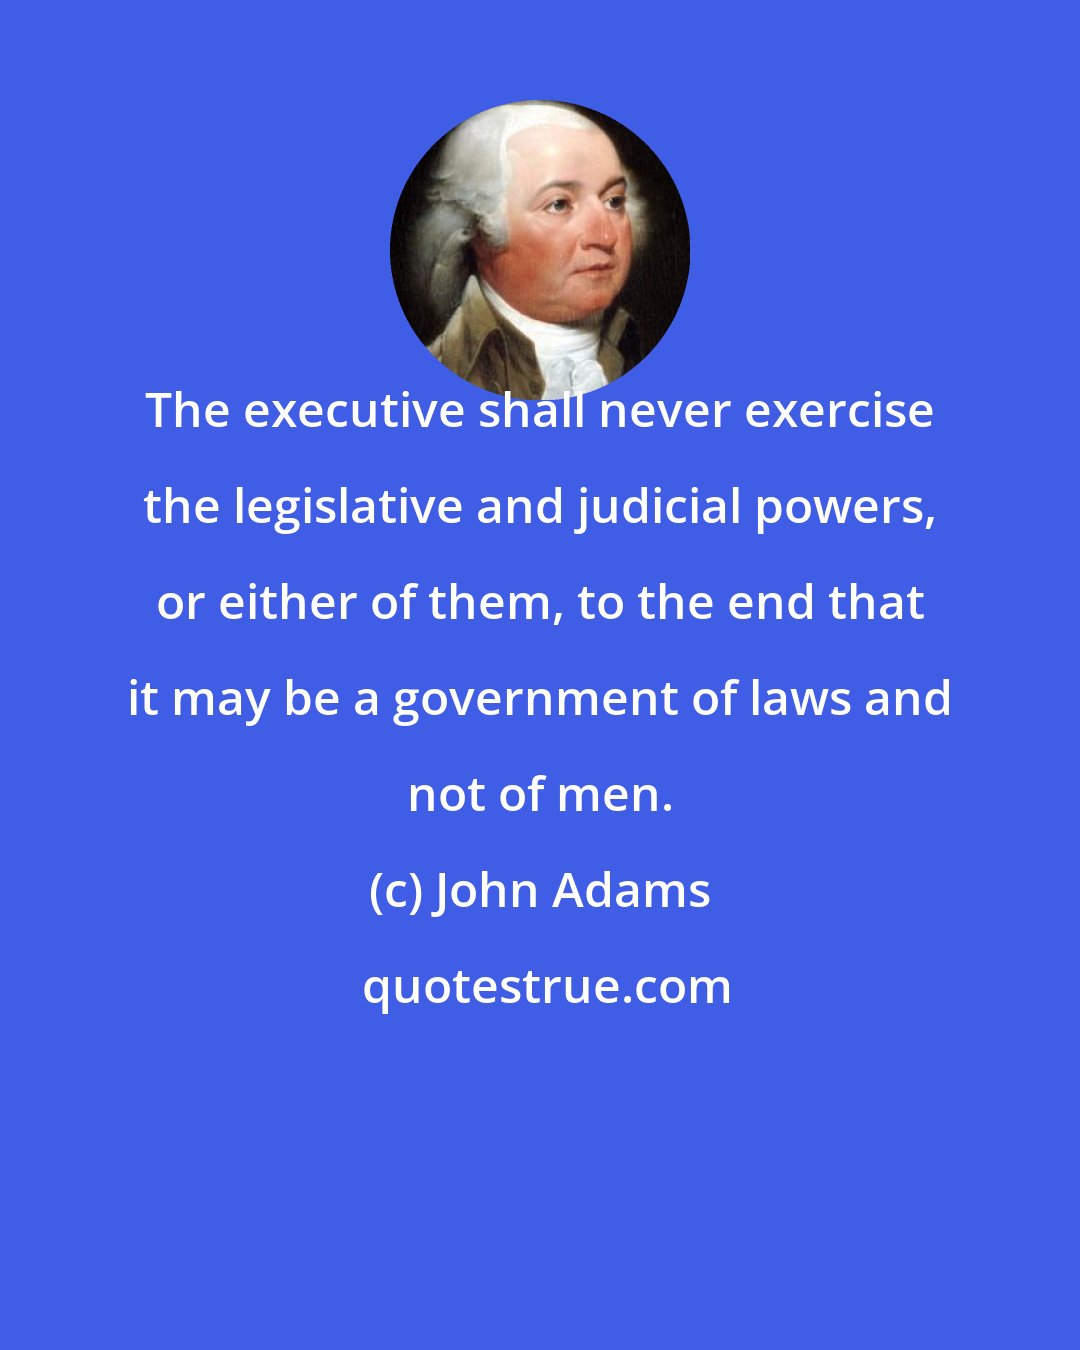 John Adams: The executive shall never exercise the legislative and judicial powers, or either of them, to the end that it may be a government of laws and not of men.